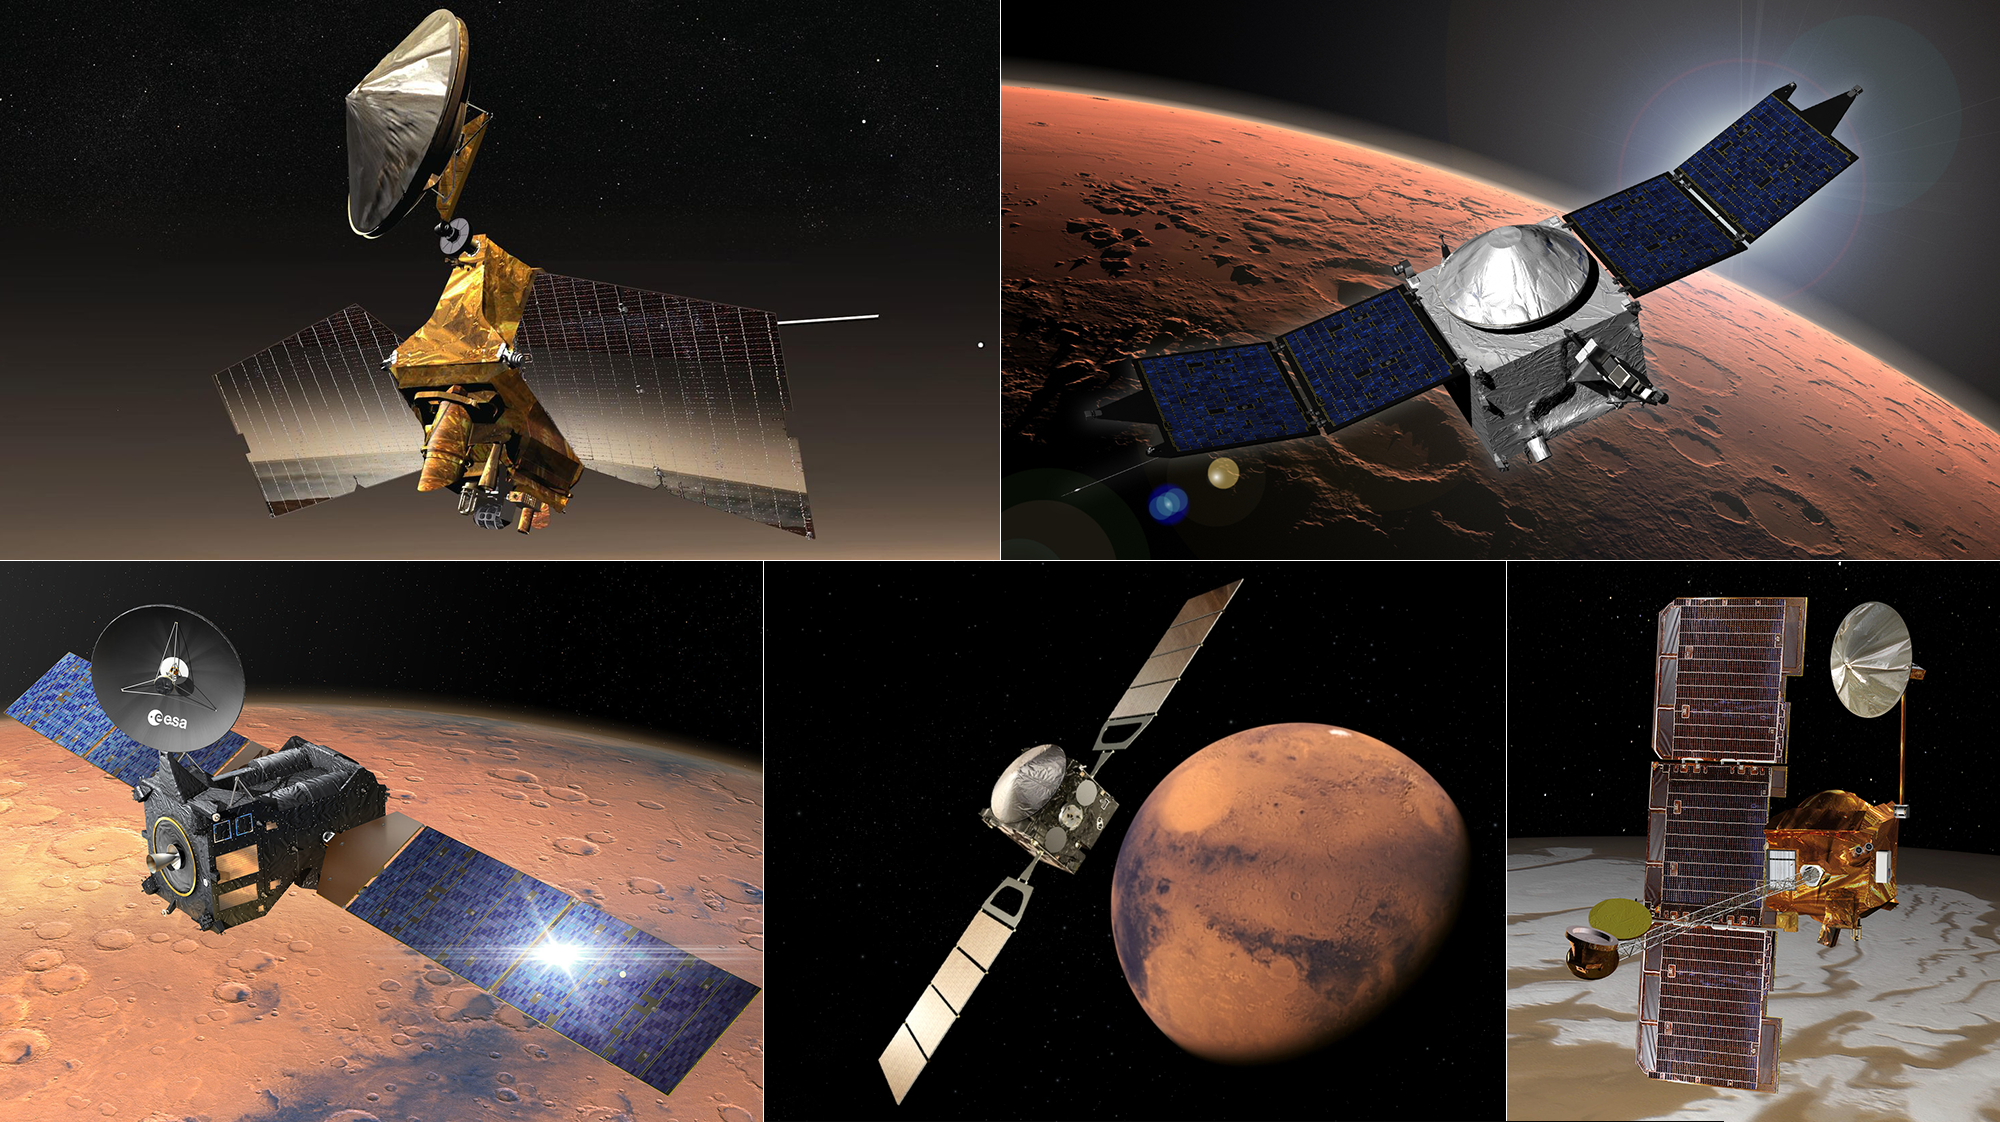 Five Martian spacecraft serve as relays for missions to the surface of the Red Planet: NASA's Mars Reconnaissance Orbiter, MAVEN and Mars Odyssey, and the European Space Agency's Mars Express and Trace Gas Orbiter.